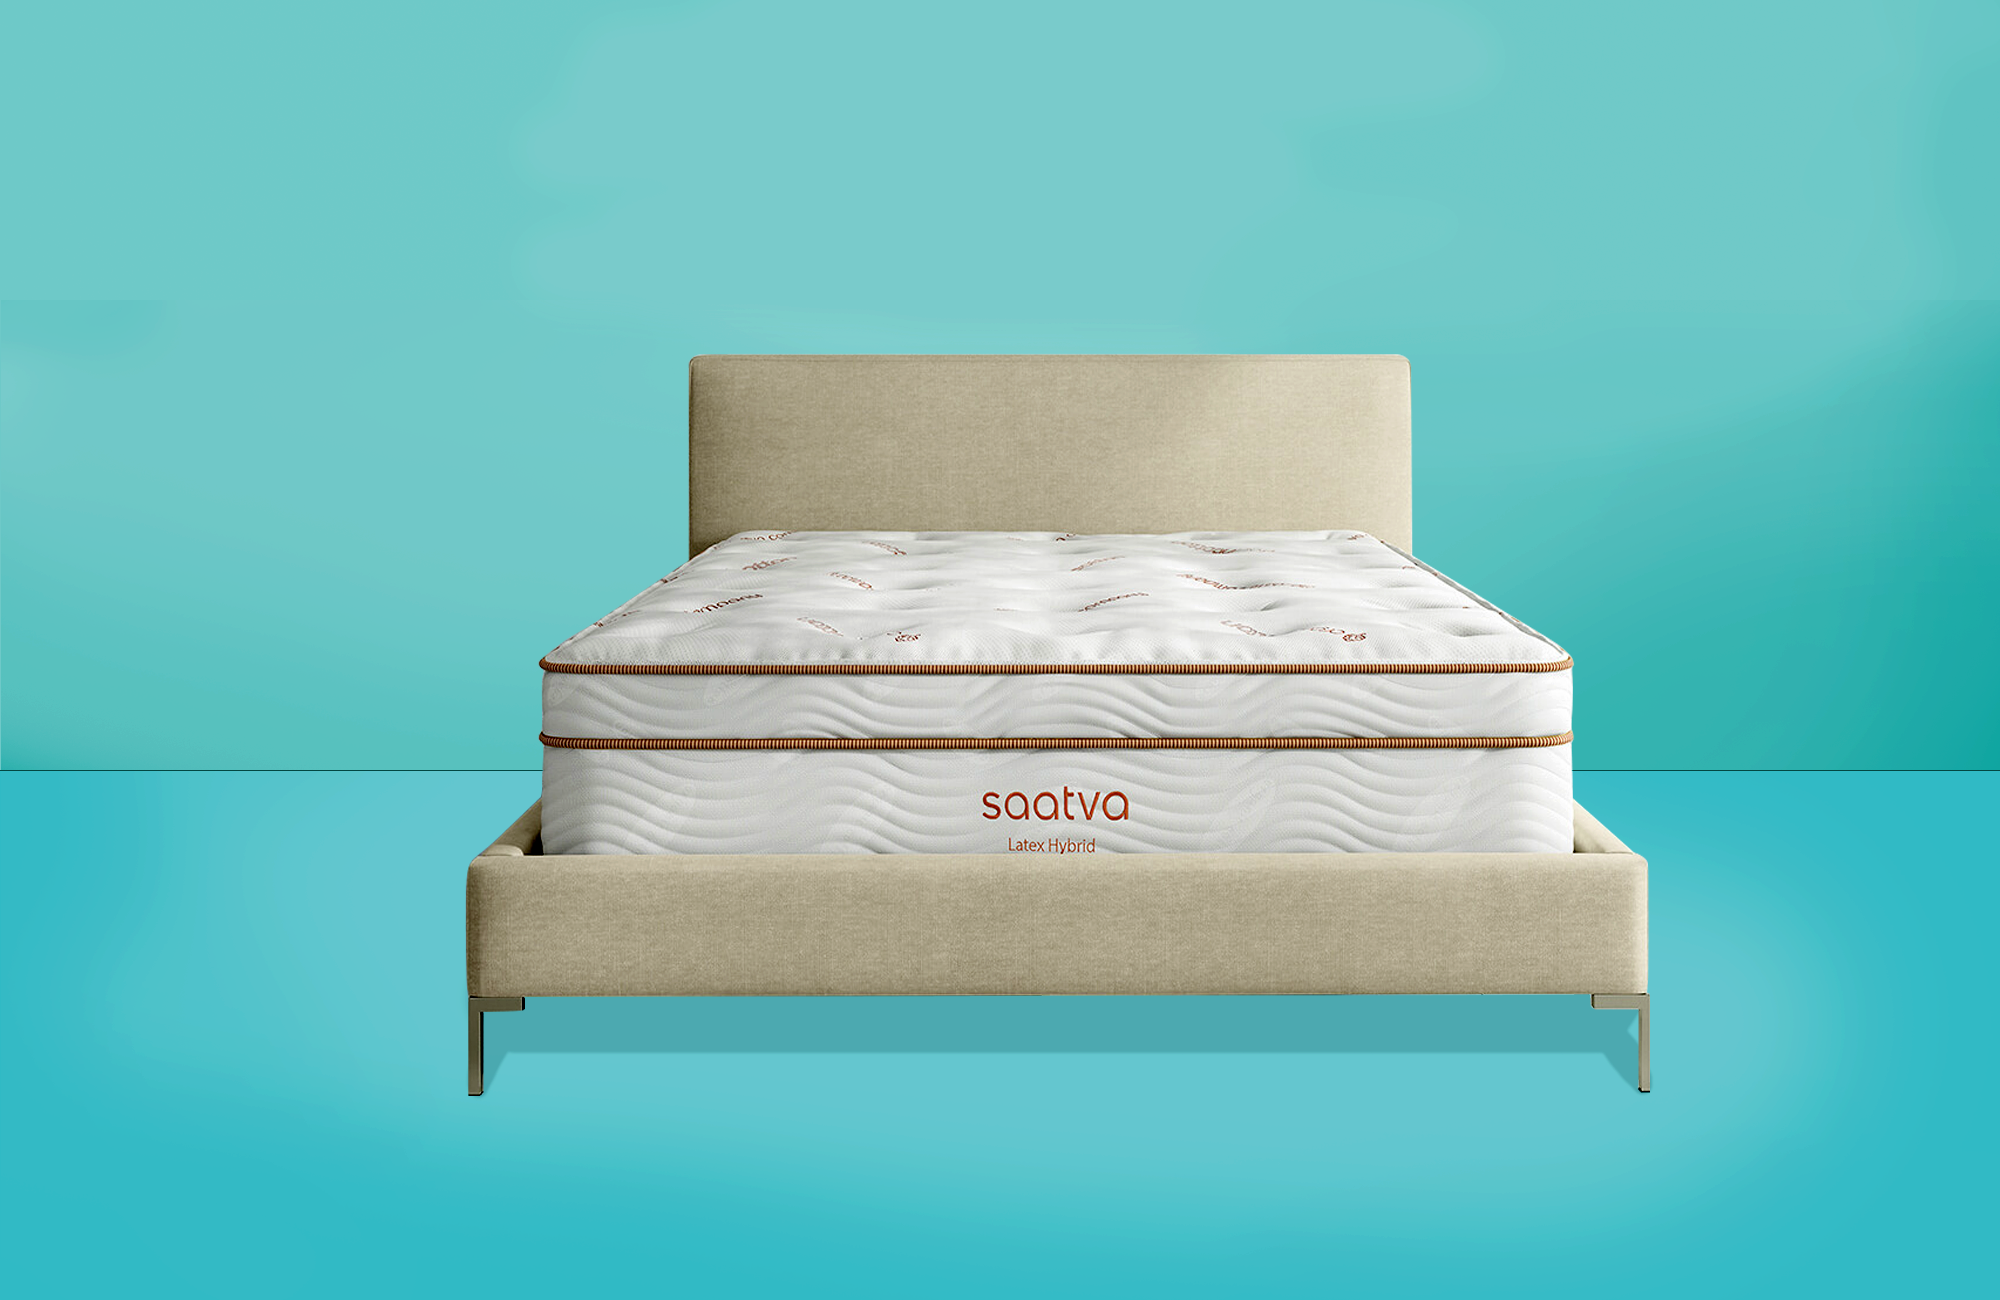 Top Mattress And Bed Brands Reviewed, King Bed With Mattress Included